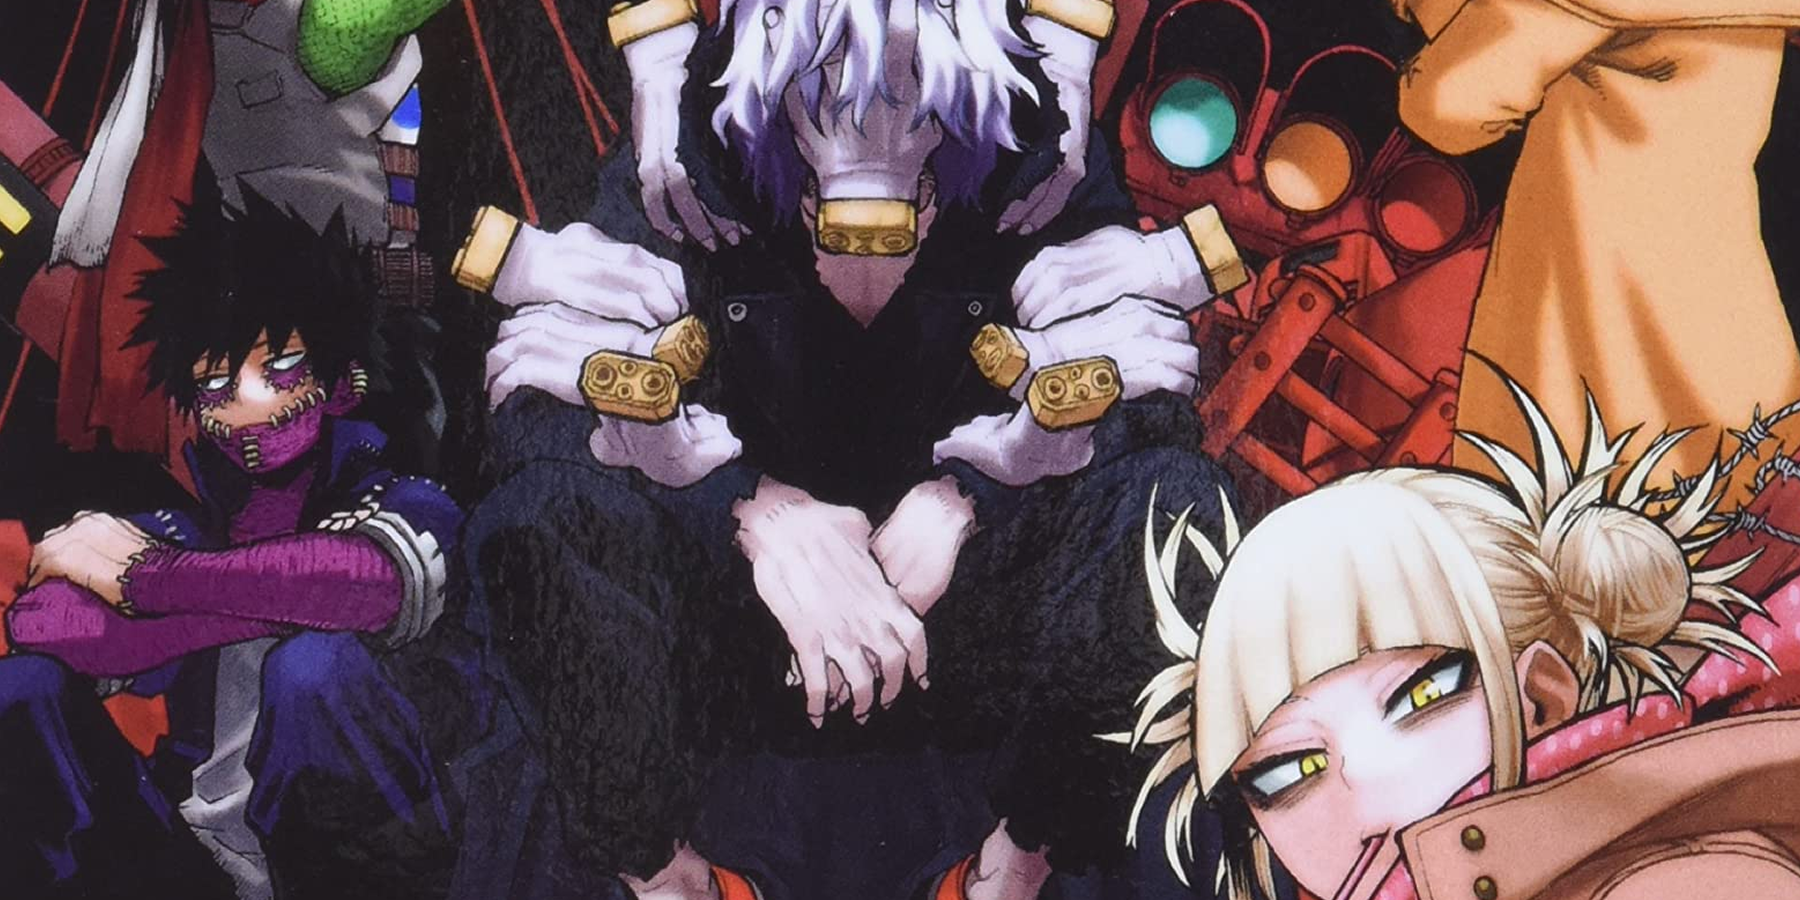 Dabi, Tomura, and Toga on vol 24 cover